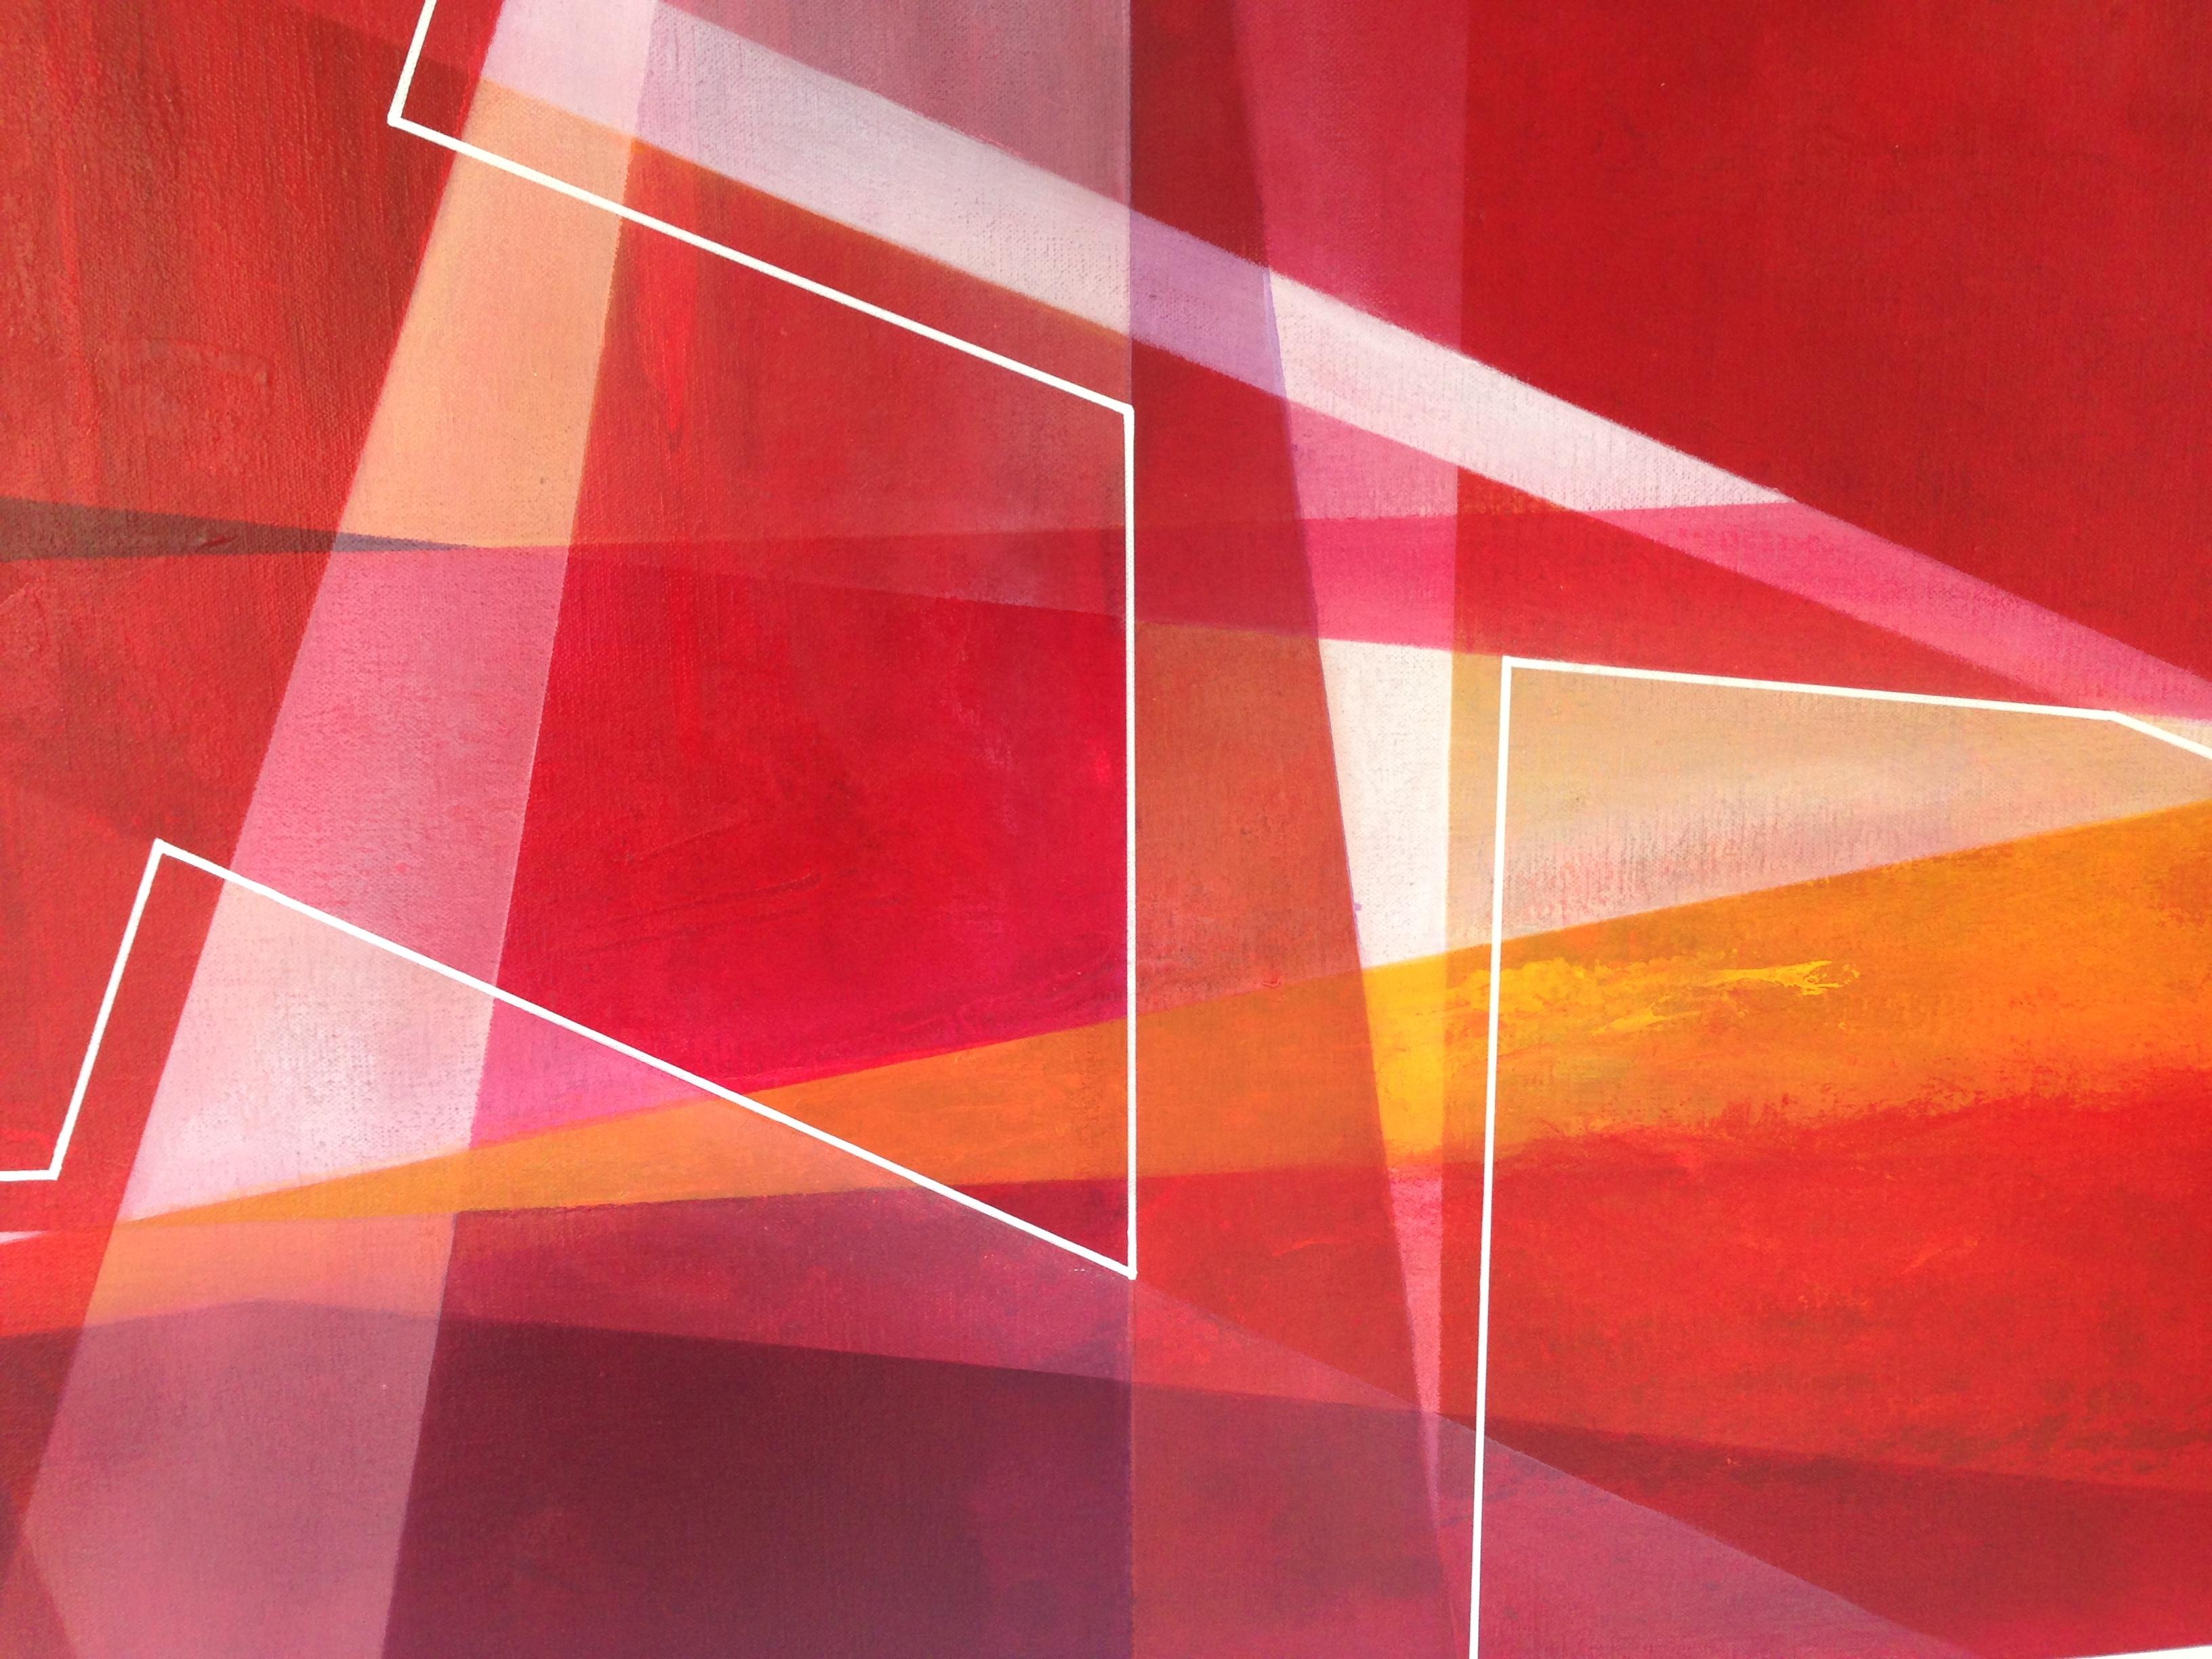 Art & Architecture - New Day, Painting, Acrylic on Canvas - Red Abstract Painting by Eric Cornelis Bos